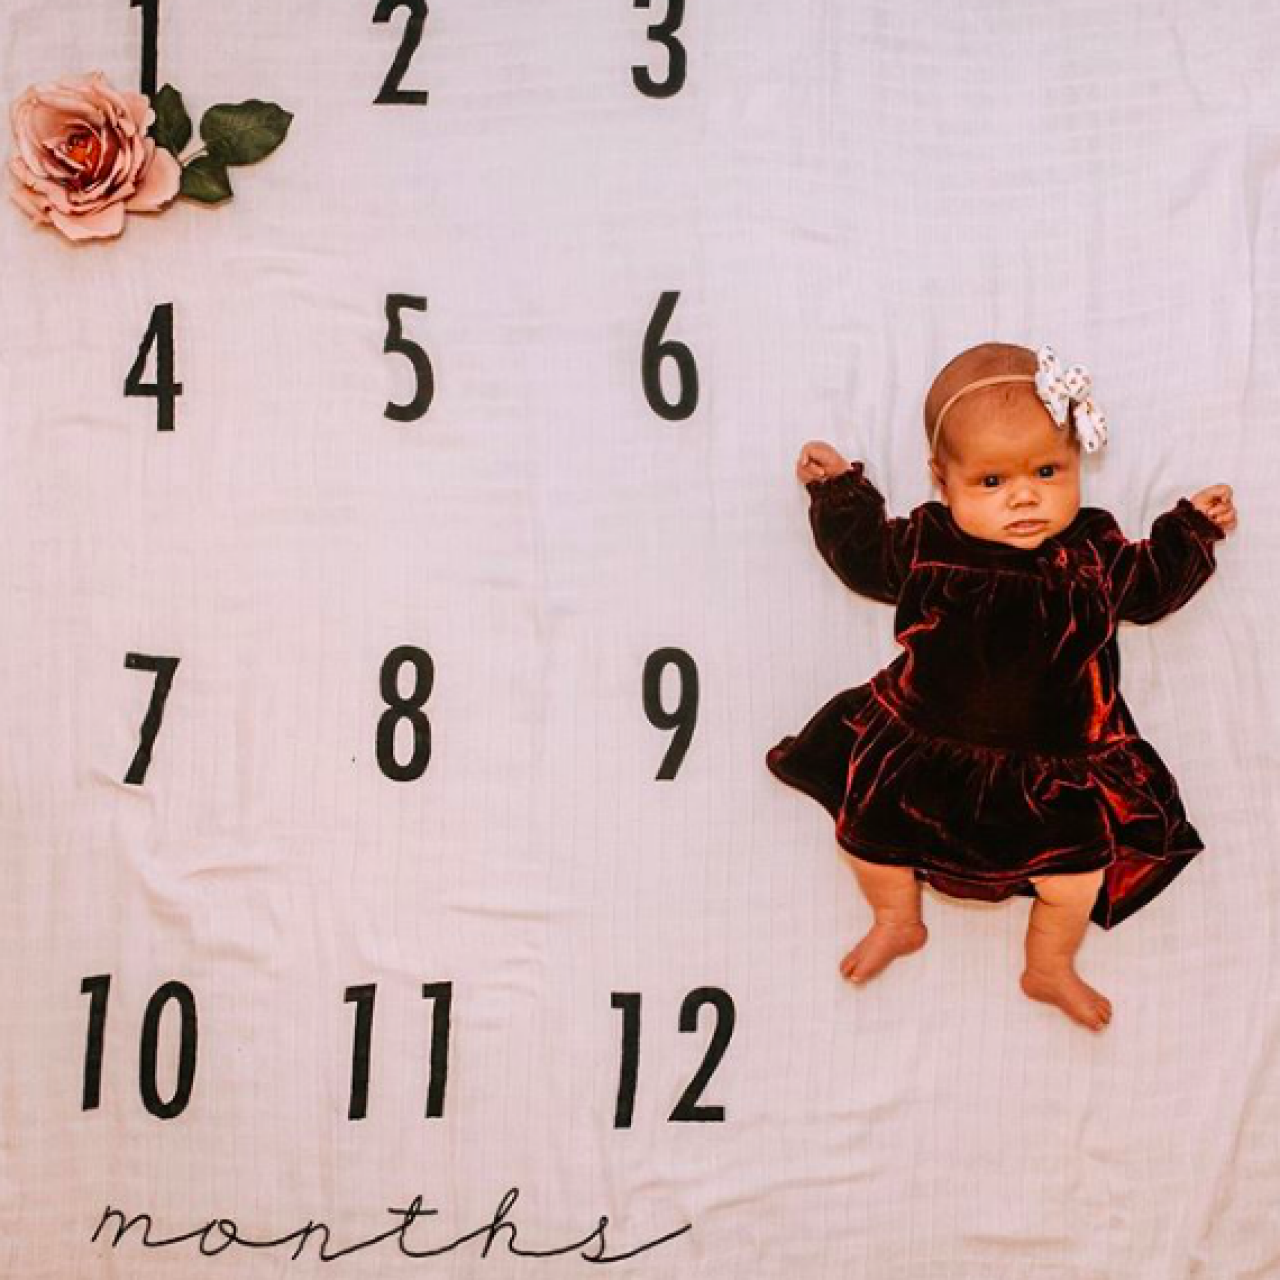 1 months old. 1 Month old. Оливии 1 месяц. Happy 10 months old картинки. Lil month.